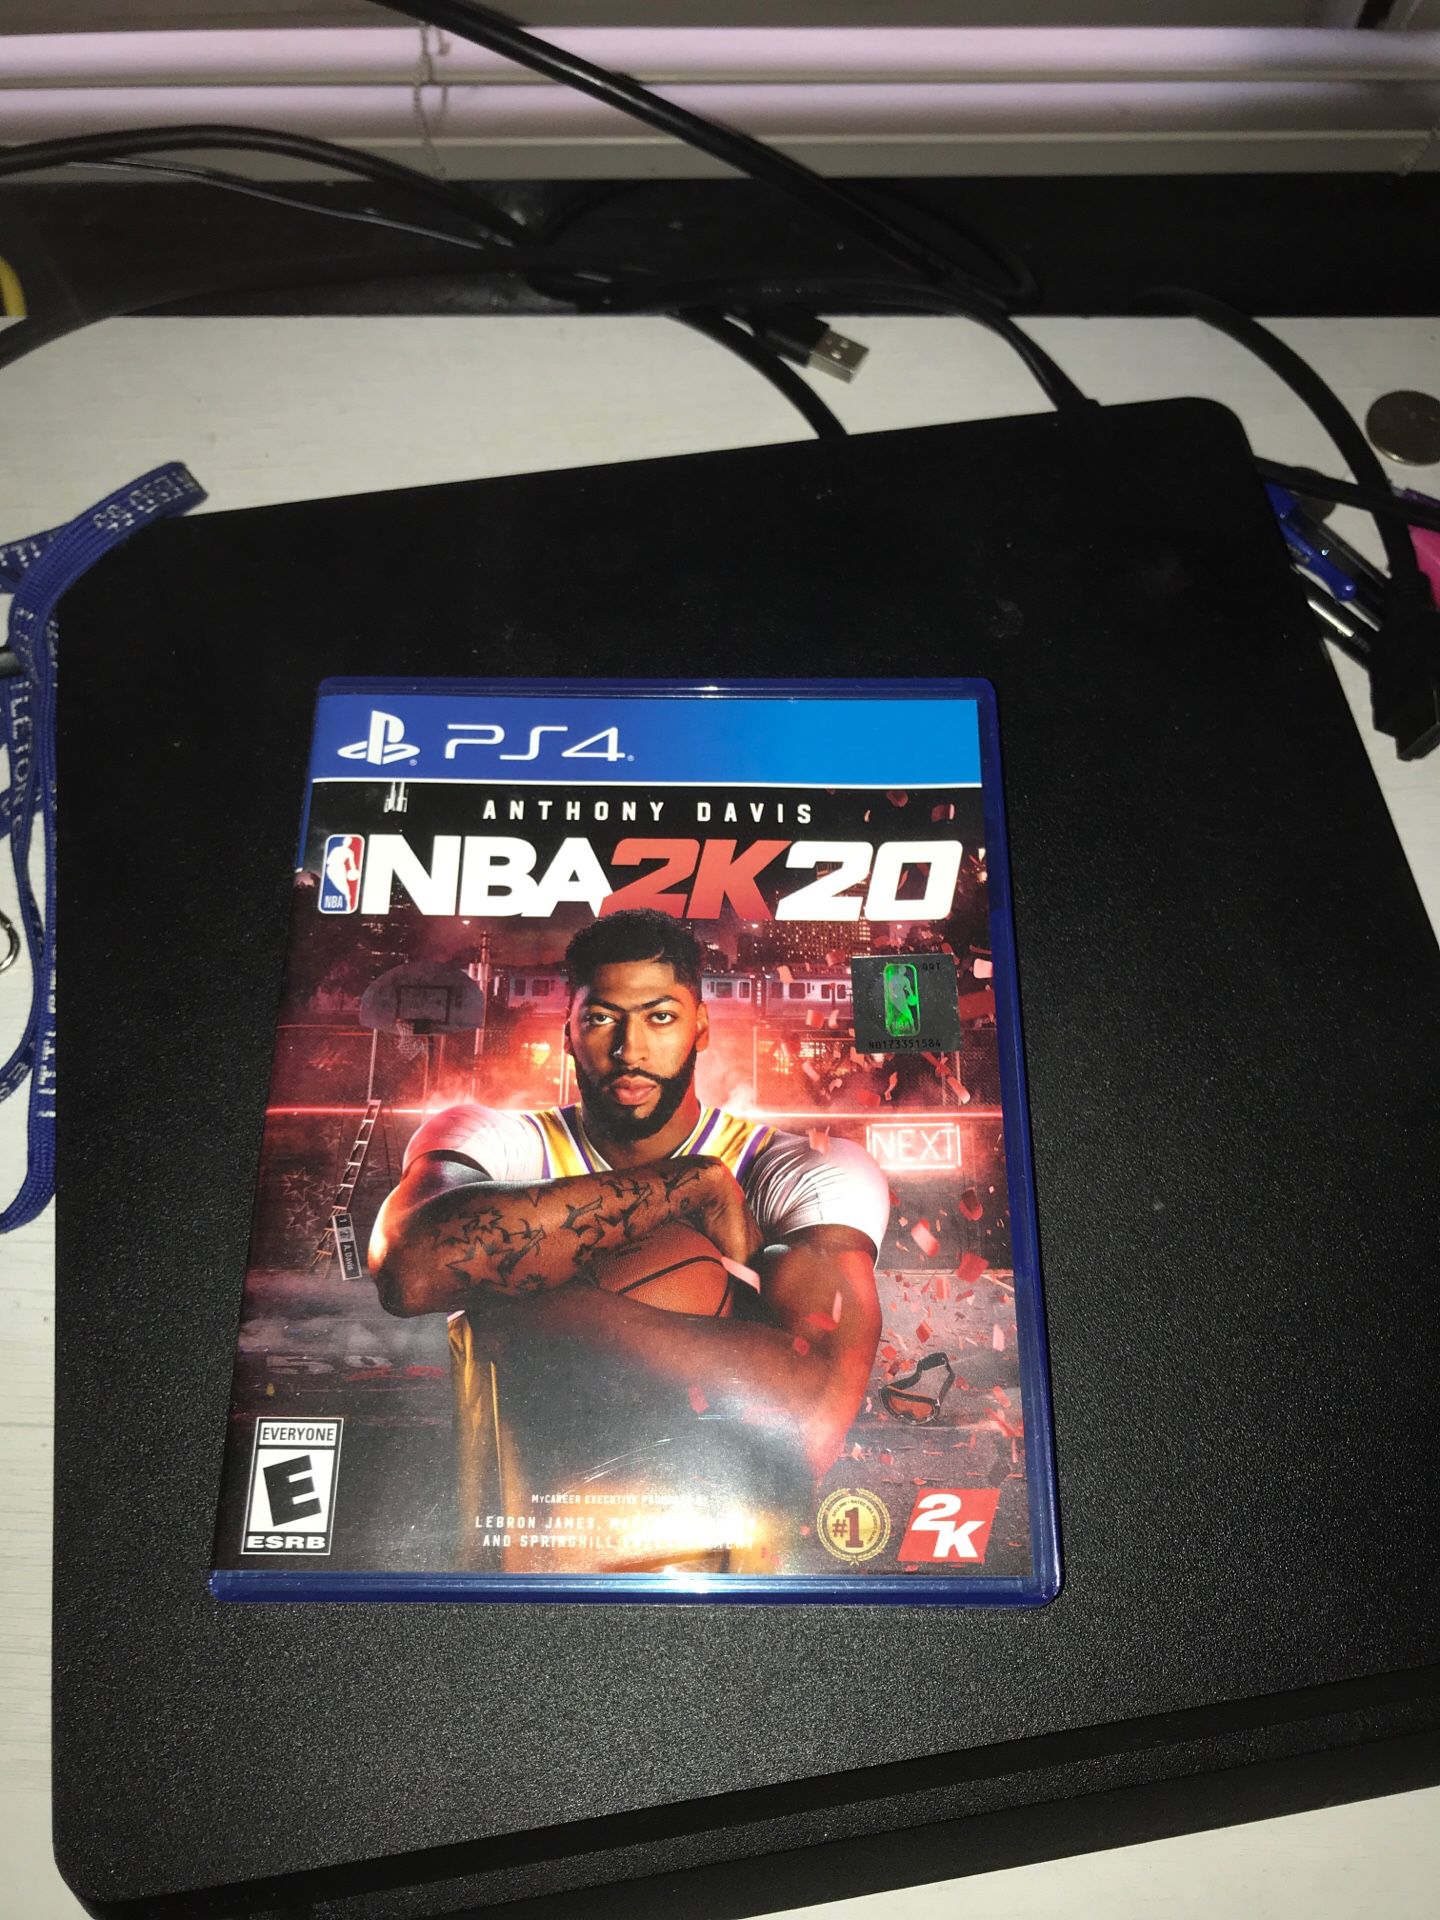 2k20 for 40